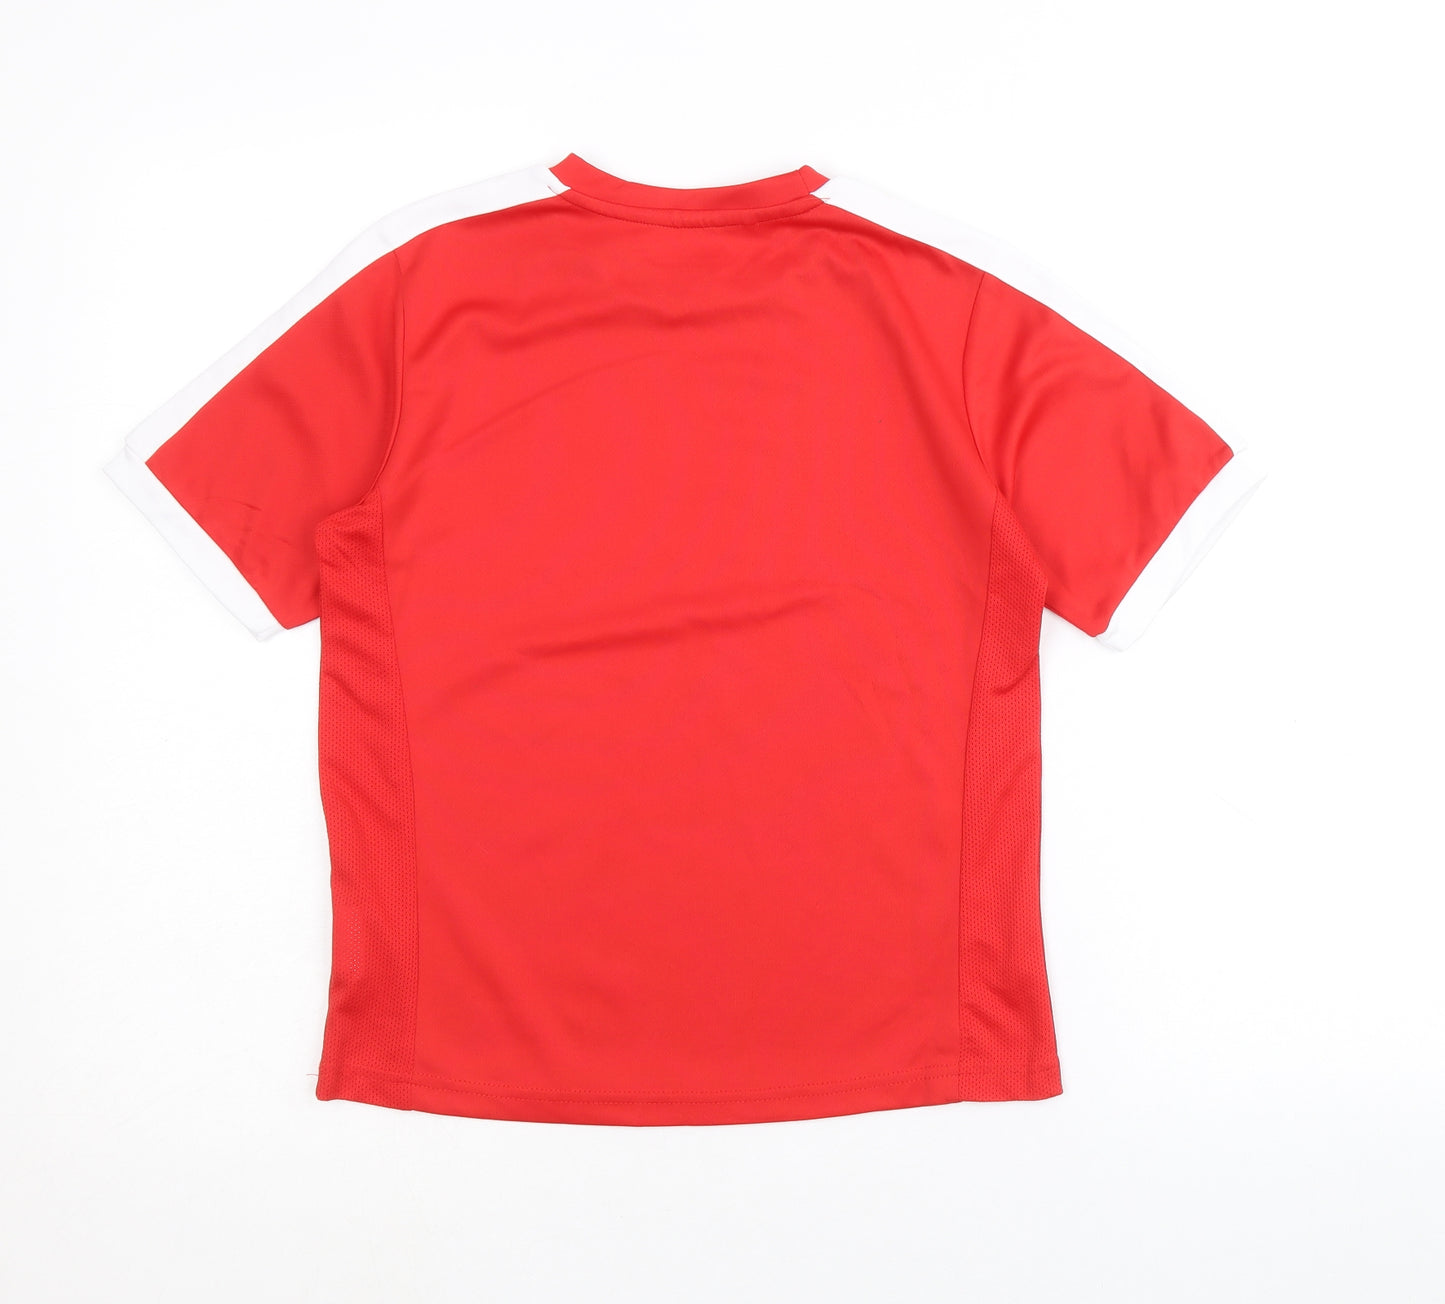 Sondico Boys Red Polyester Basic T-Shirt Size 9-10 Years Round Neck Pullover